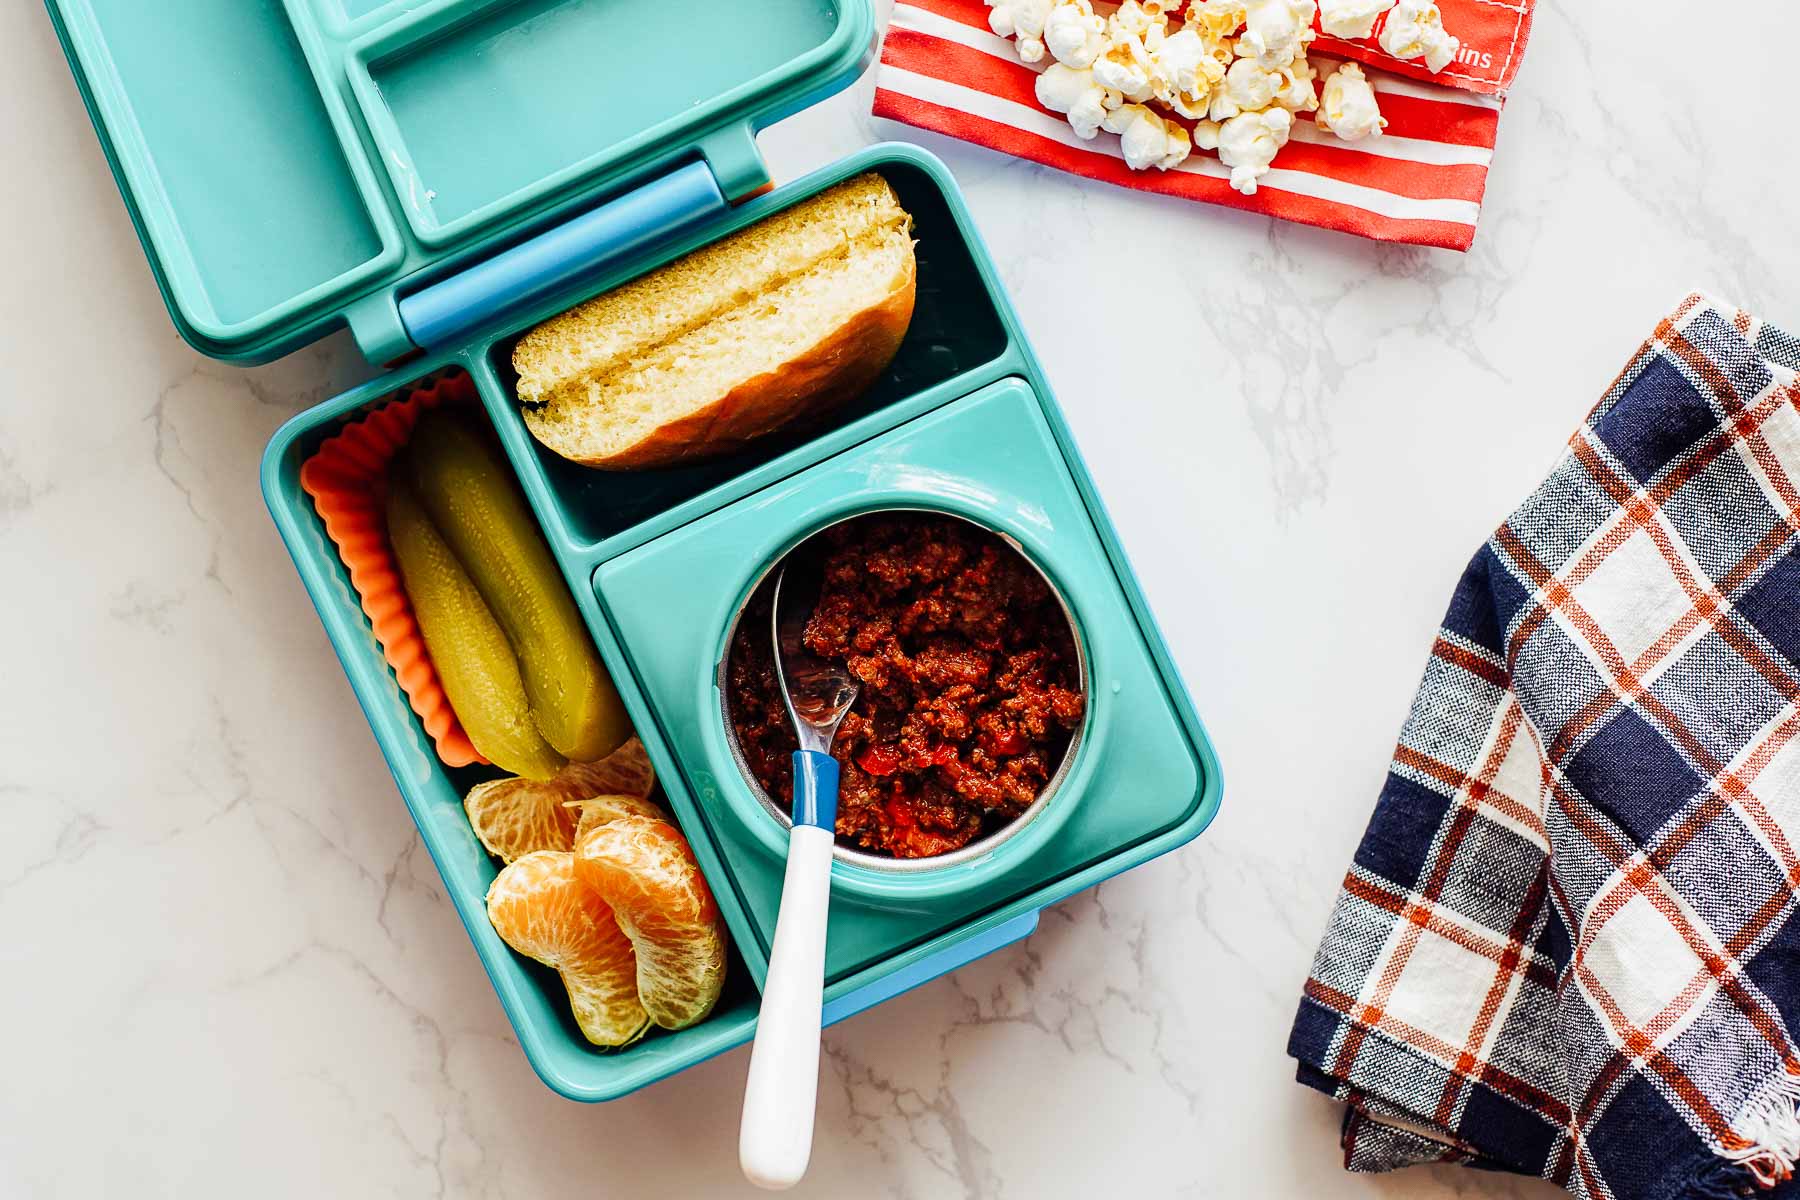 Leftover sloppy joe meat in a thermos with a bun, orange slices, pickle, and popcorn on the side in a lunchbox.